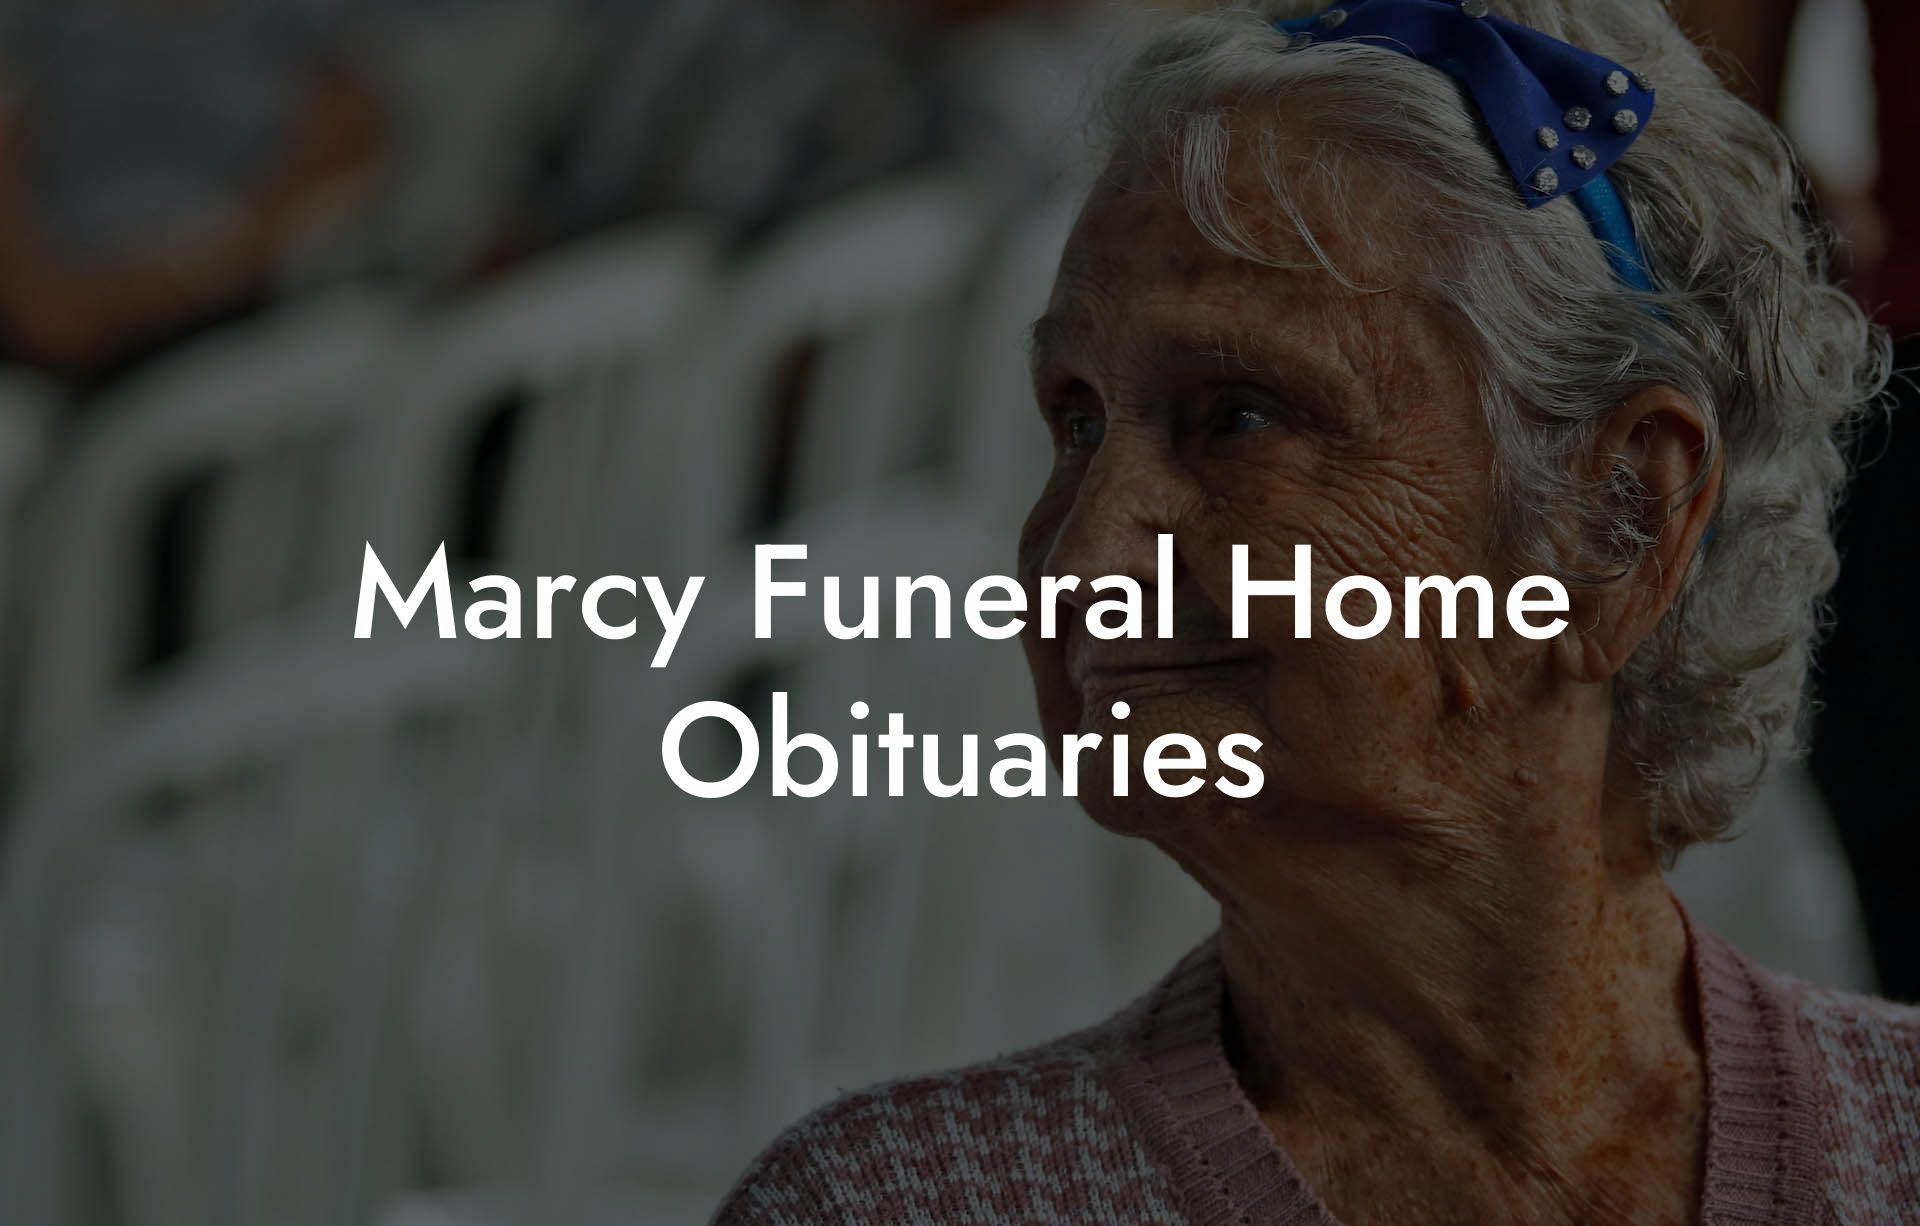 Marcy Funeral Home Obituaries